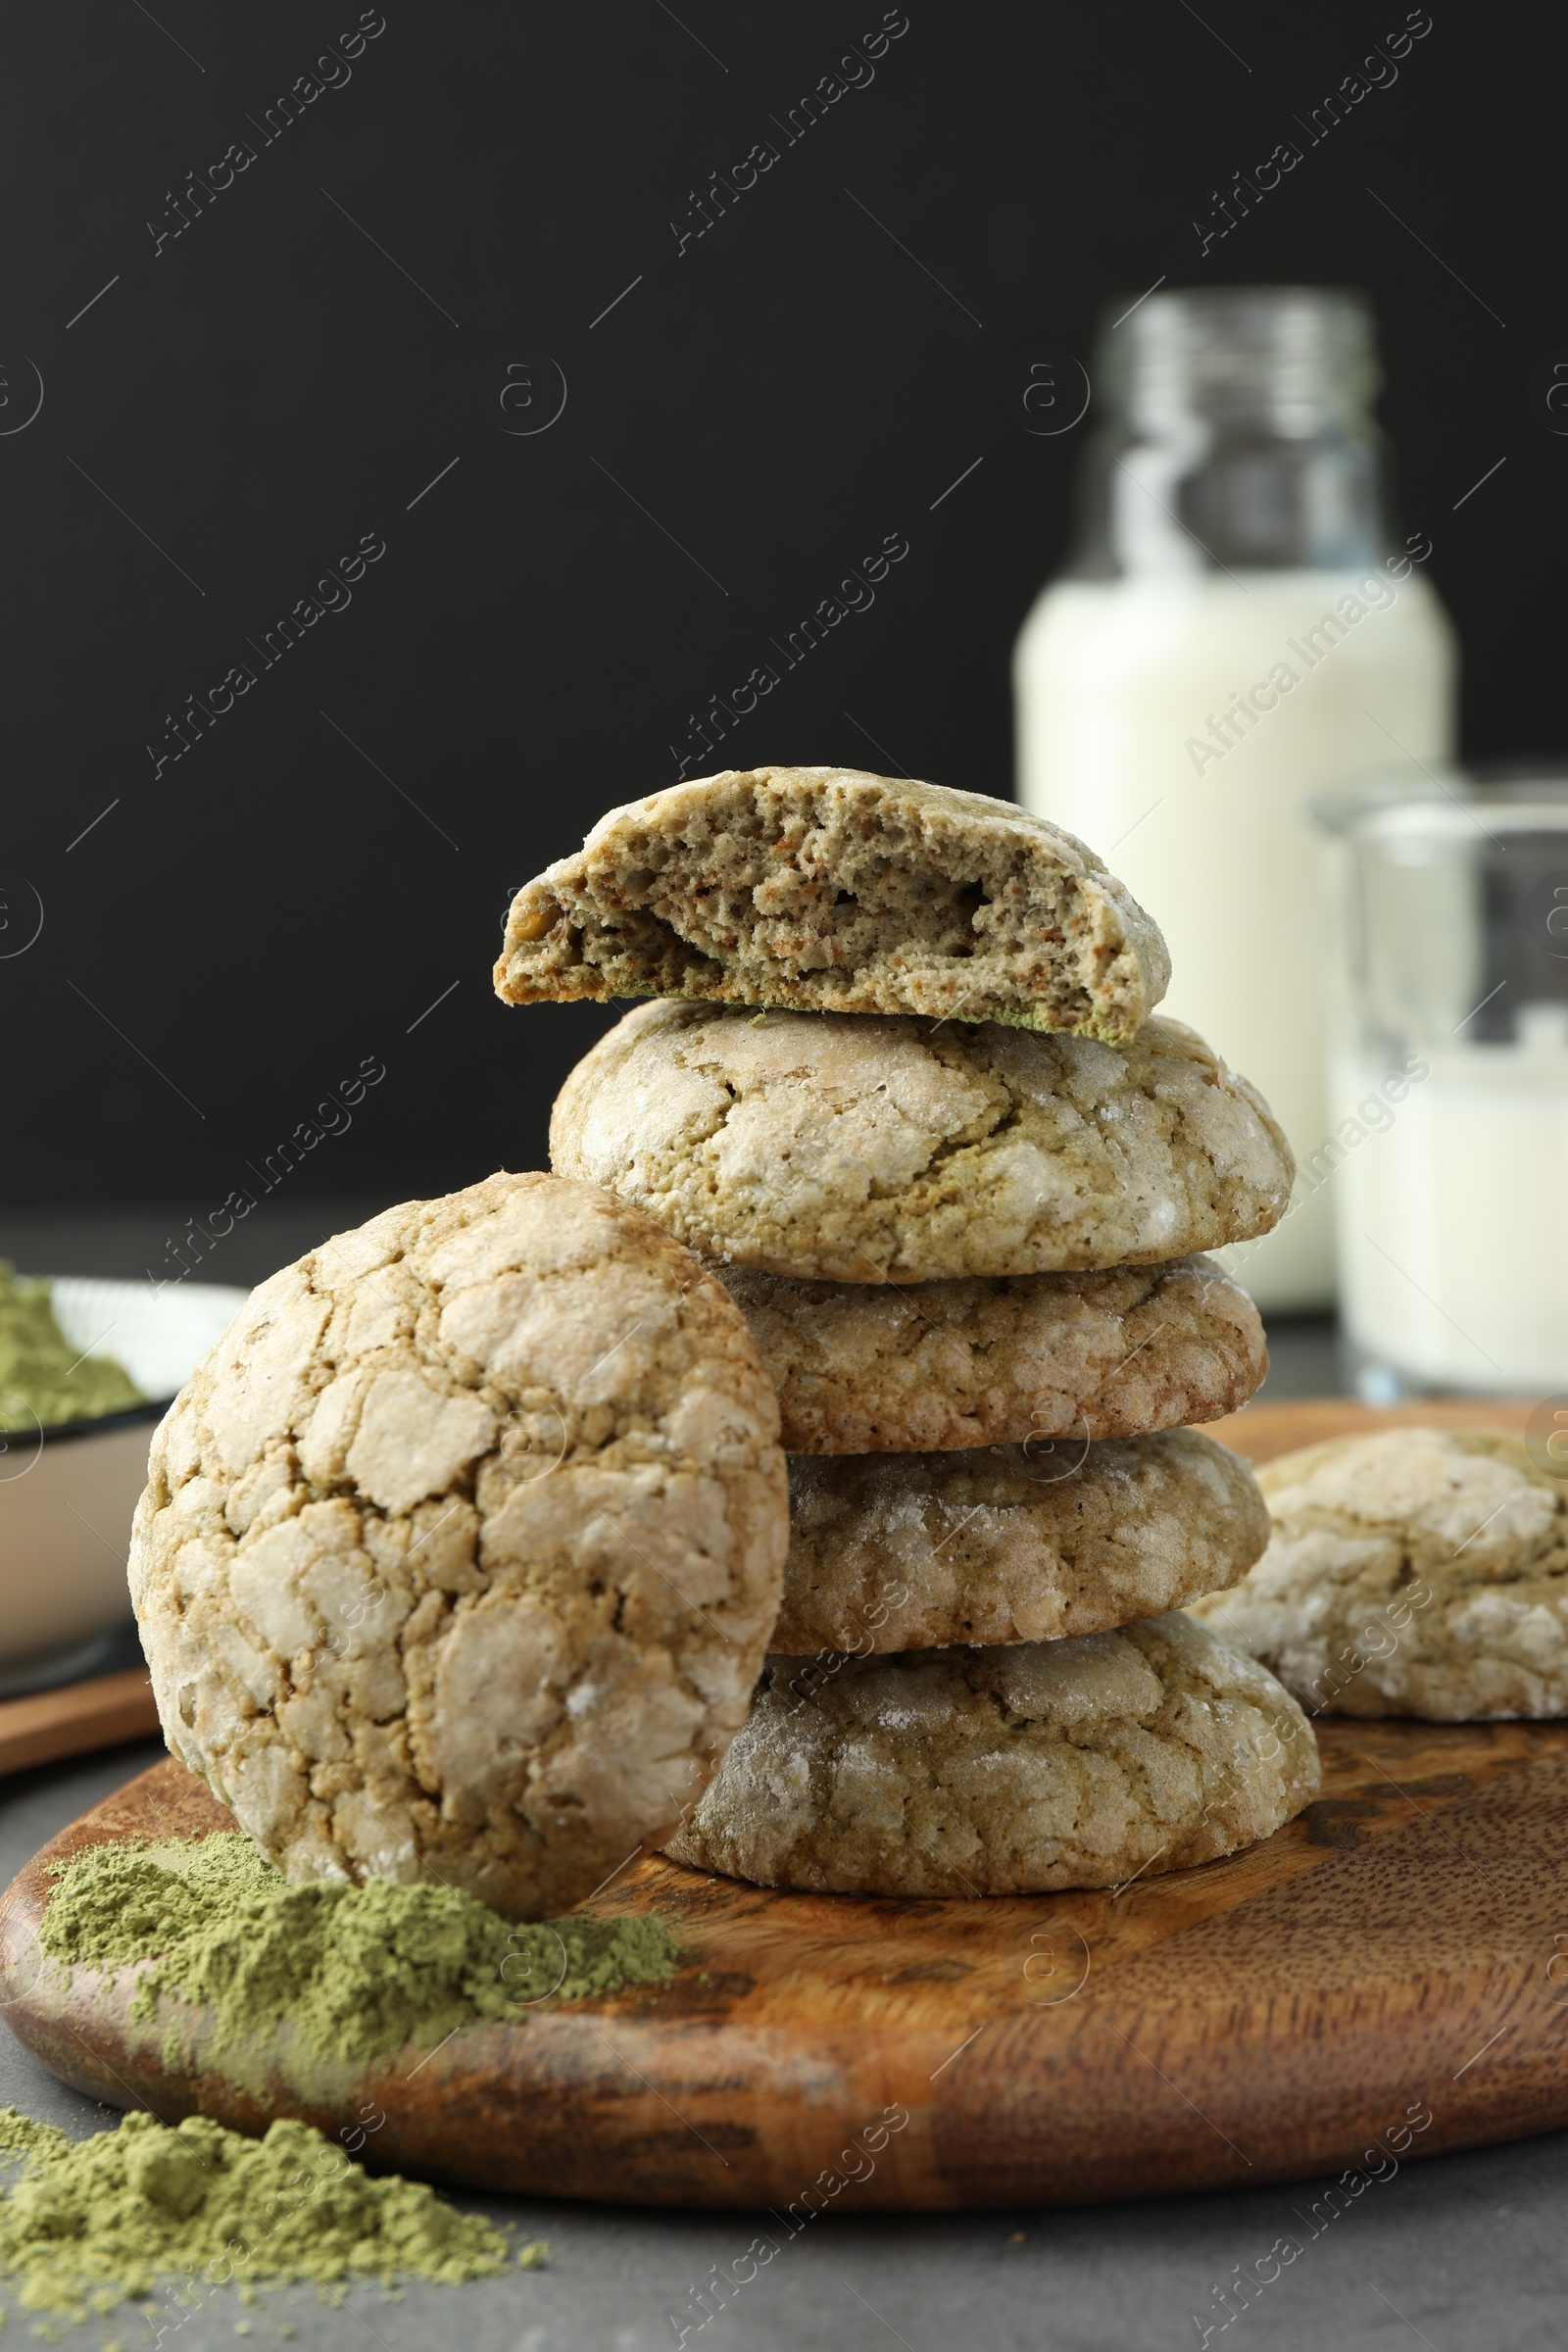 Photo of Tasty matcha cookies and powder on grey table